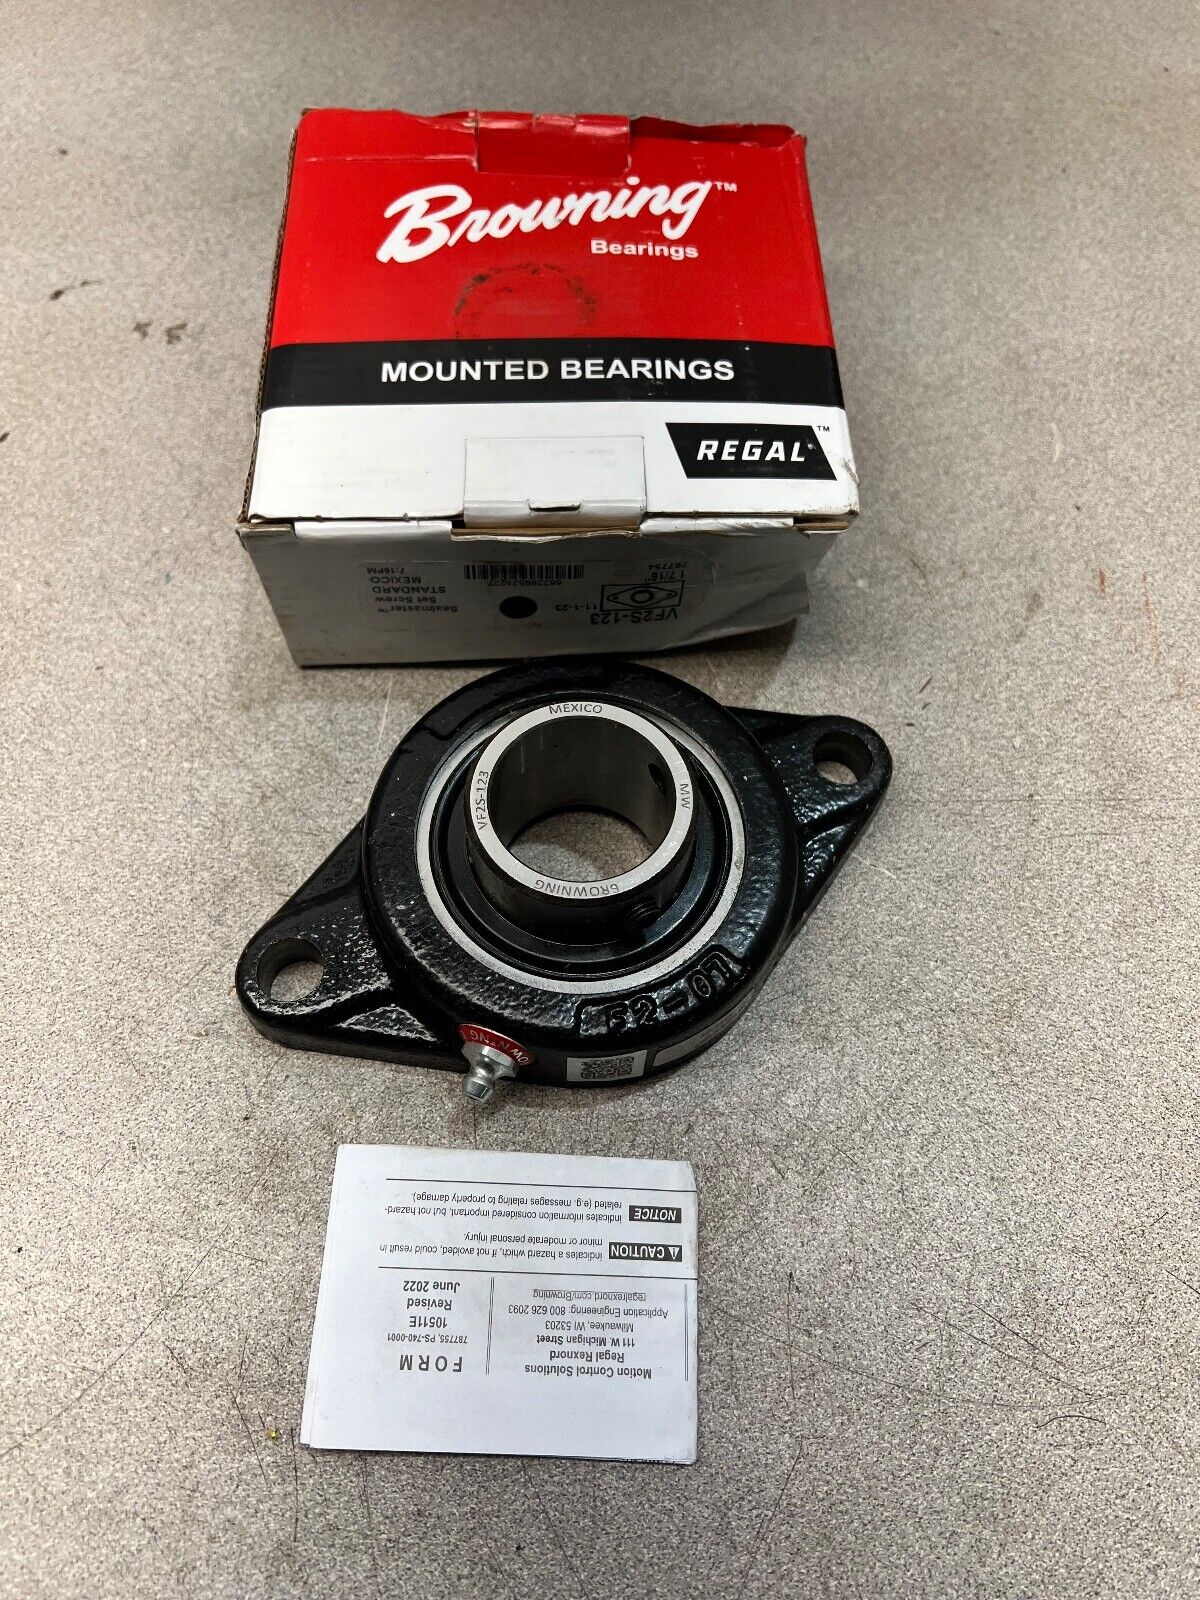 NEW IN BOX BROWNING FLANGE BEARING VF2S-123